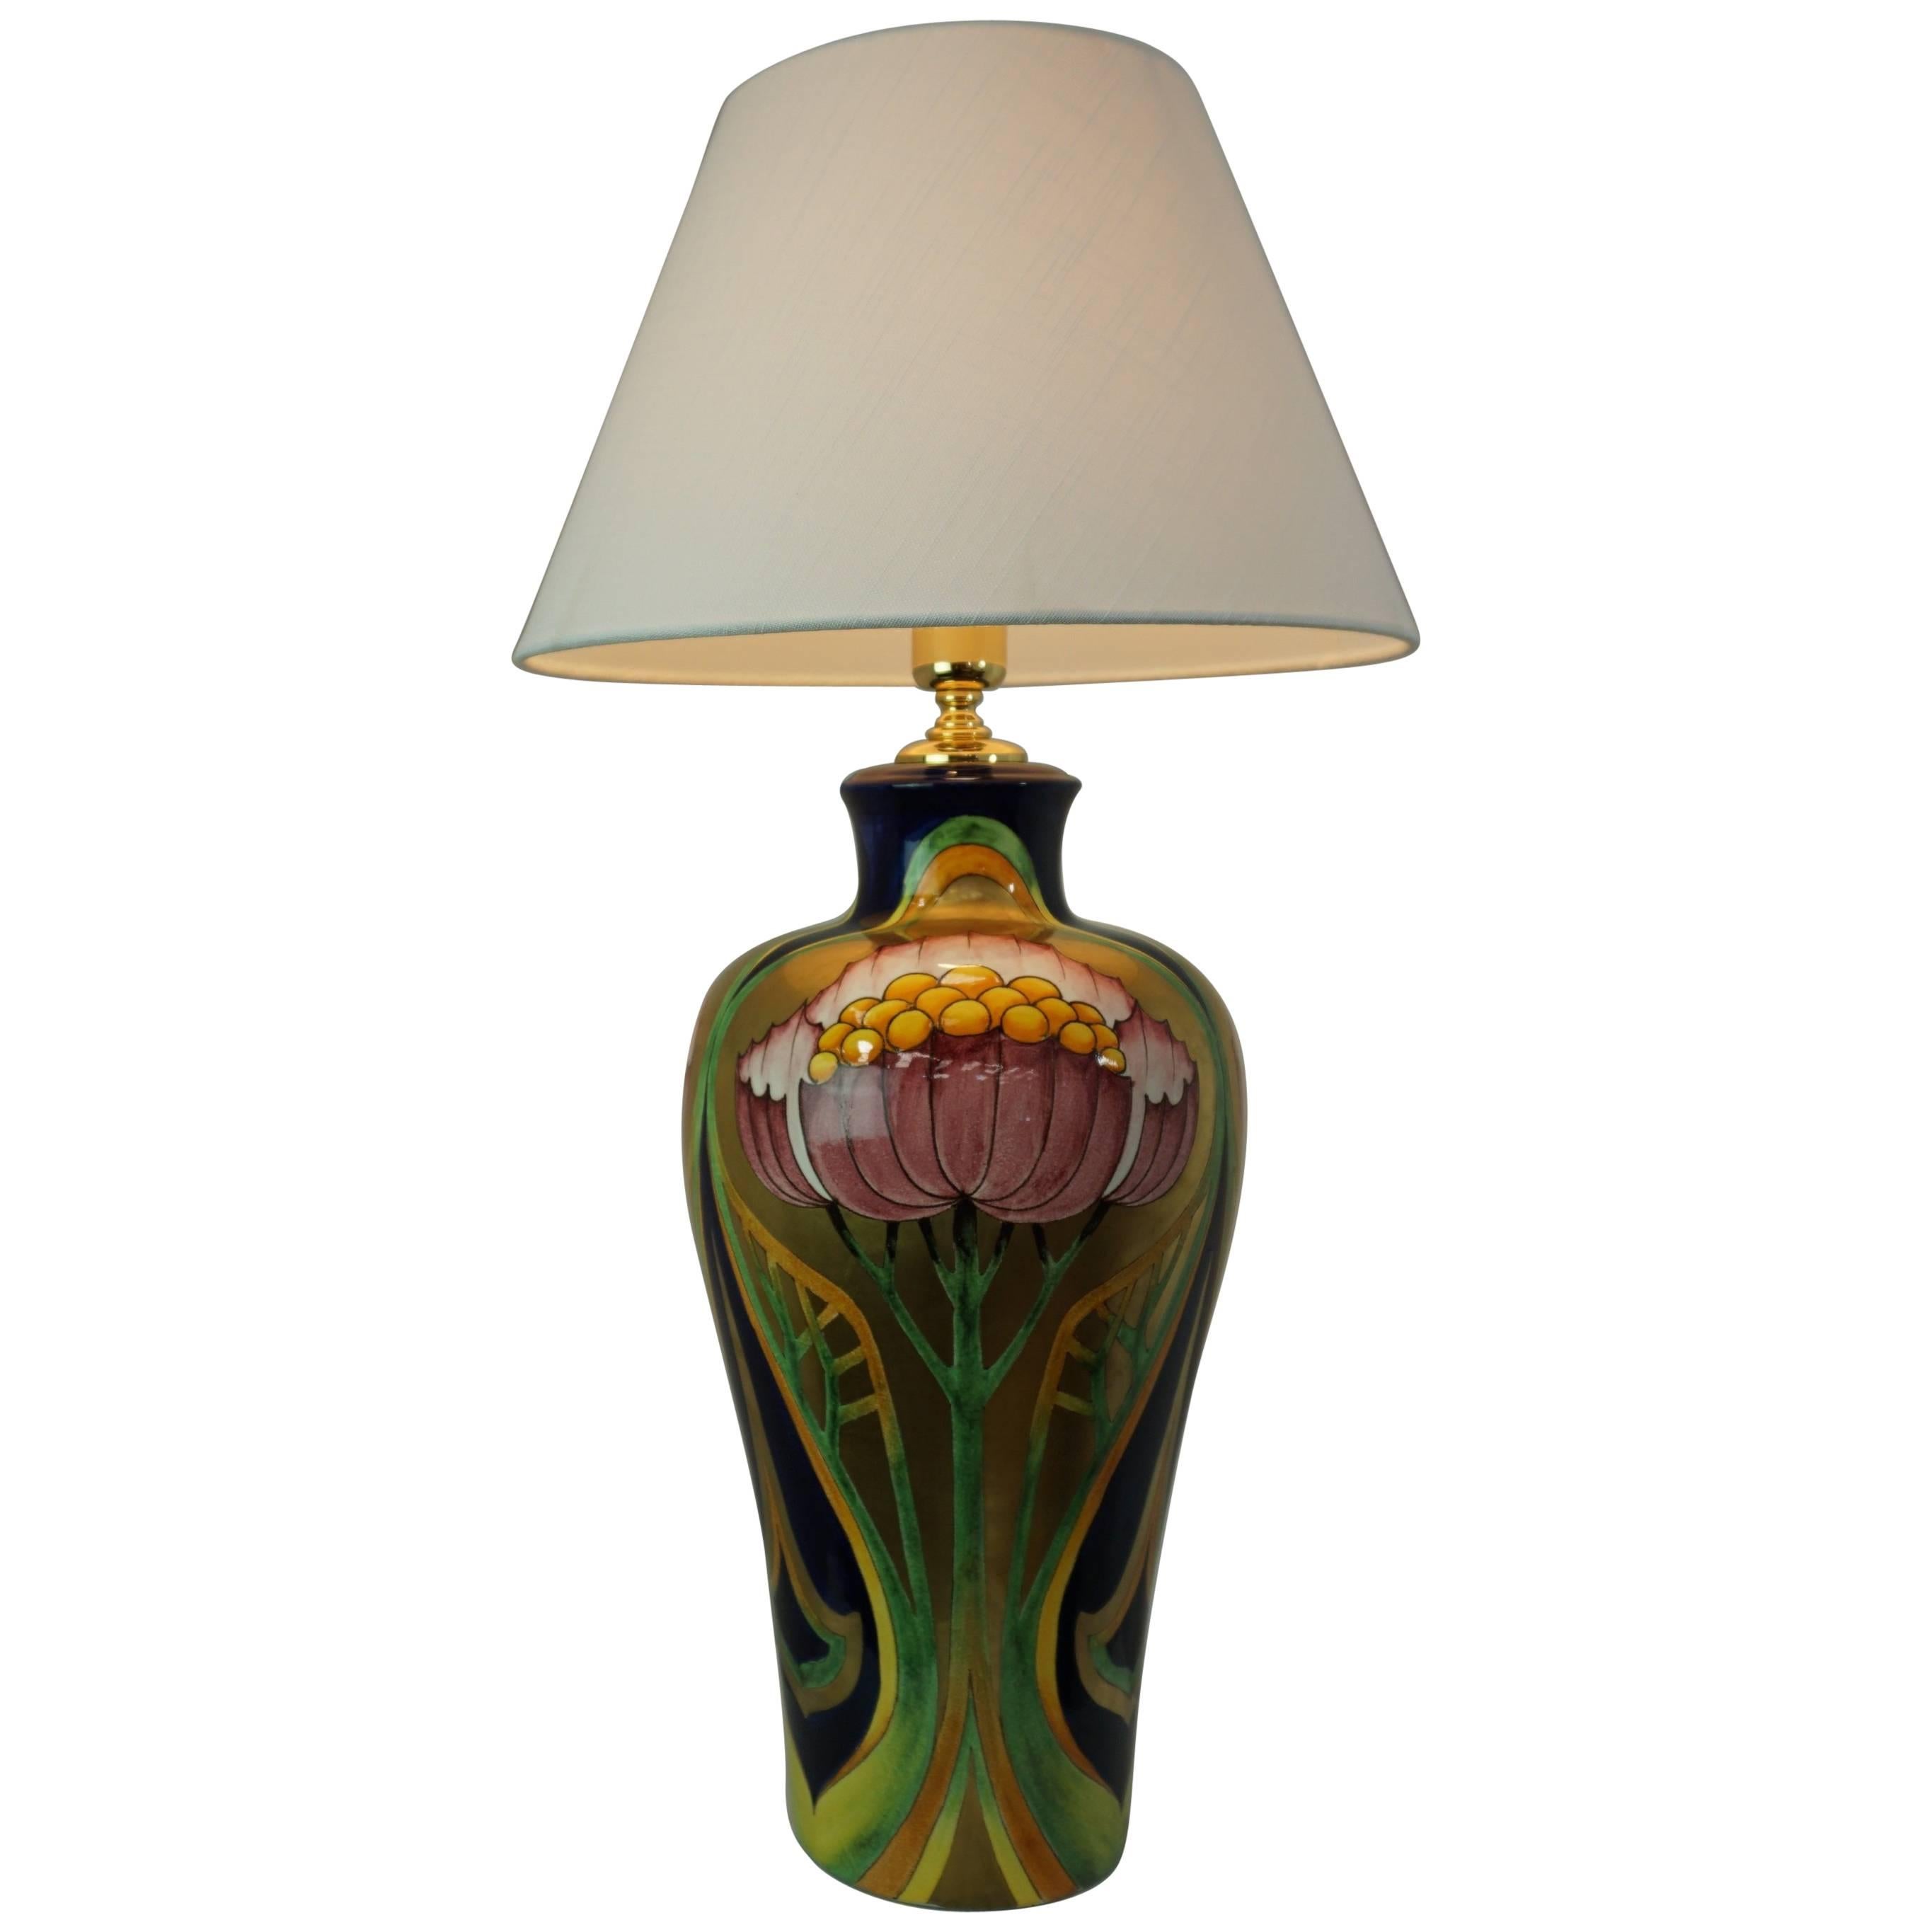 Colorful Ceramic Lamp Italian Design By "Paolo Marioni" For Sale